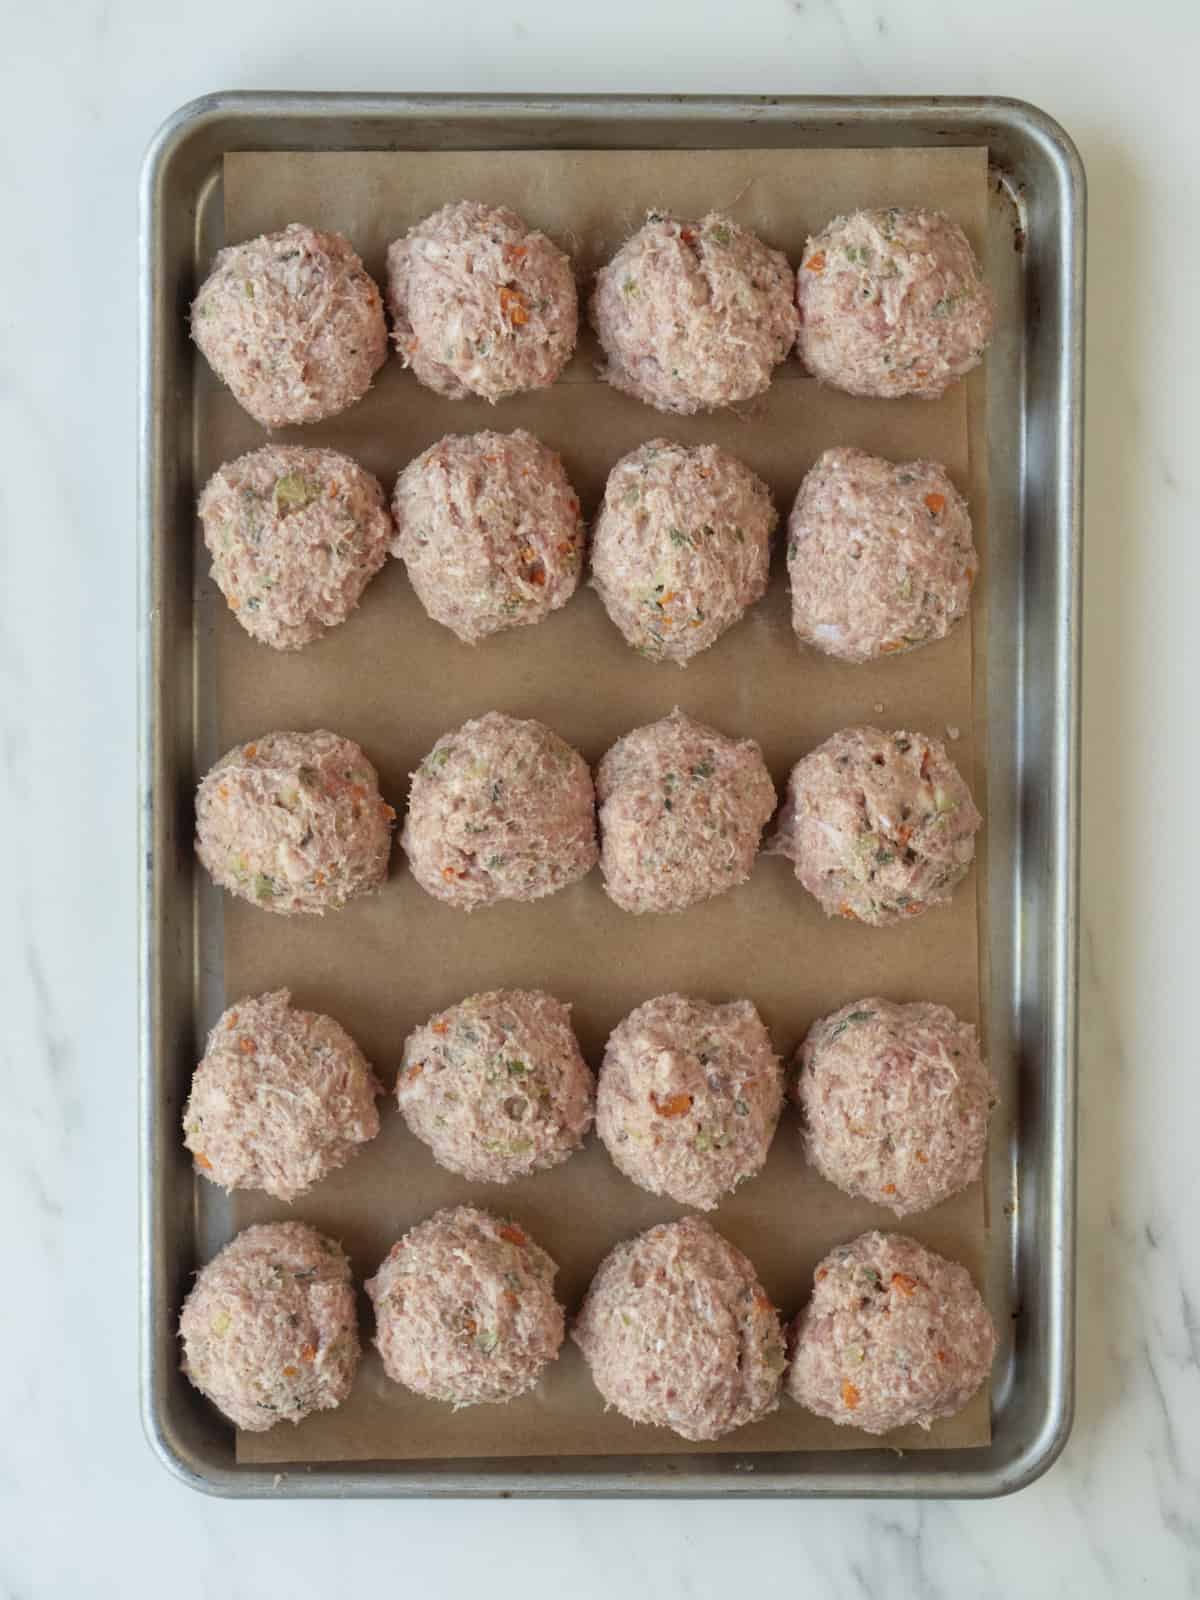 A baking sheet lined with parchment paper, with raw turkey meatballs on it in a 5x4 grid.